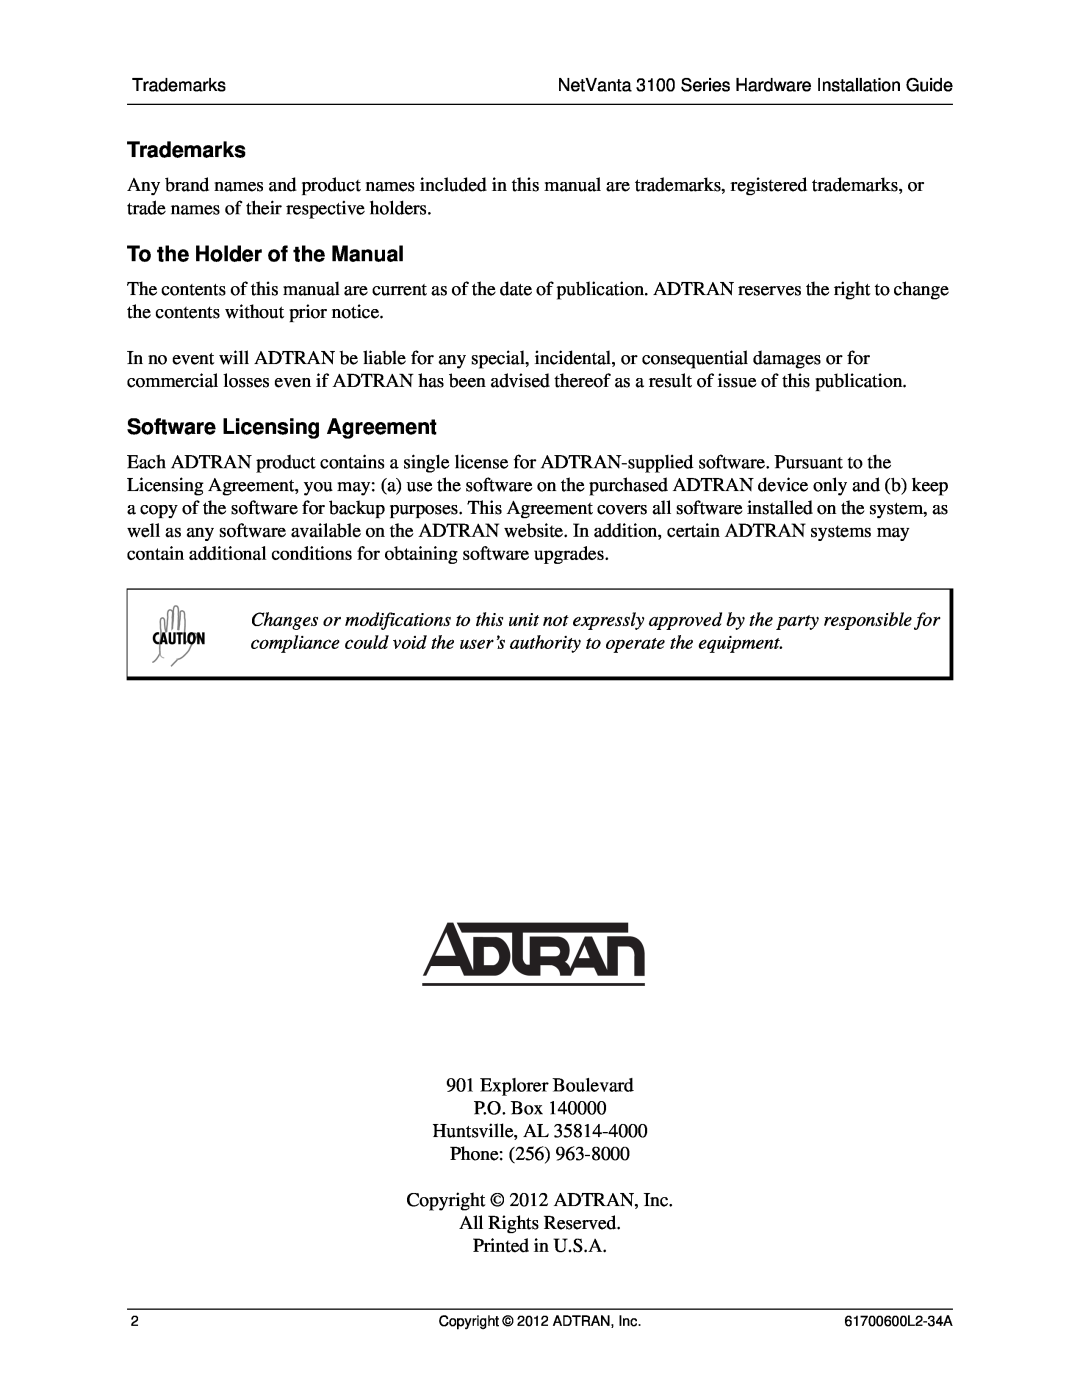 ADTRAN 1700601G2, 1700611G2, 1700600L2 manual Trademarks, To the Holder of the Manual, Software Licensing Agreement 